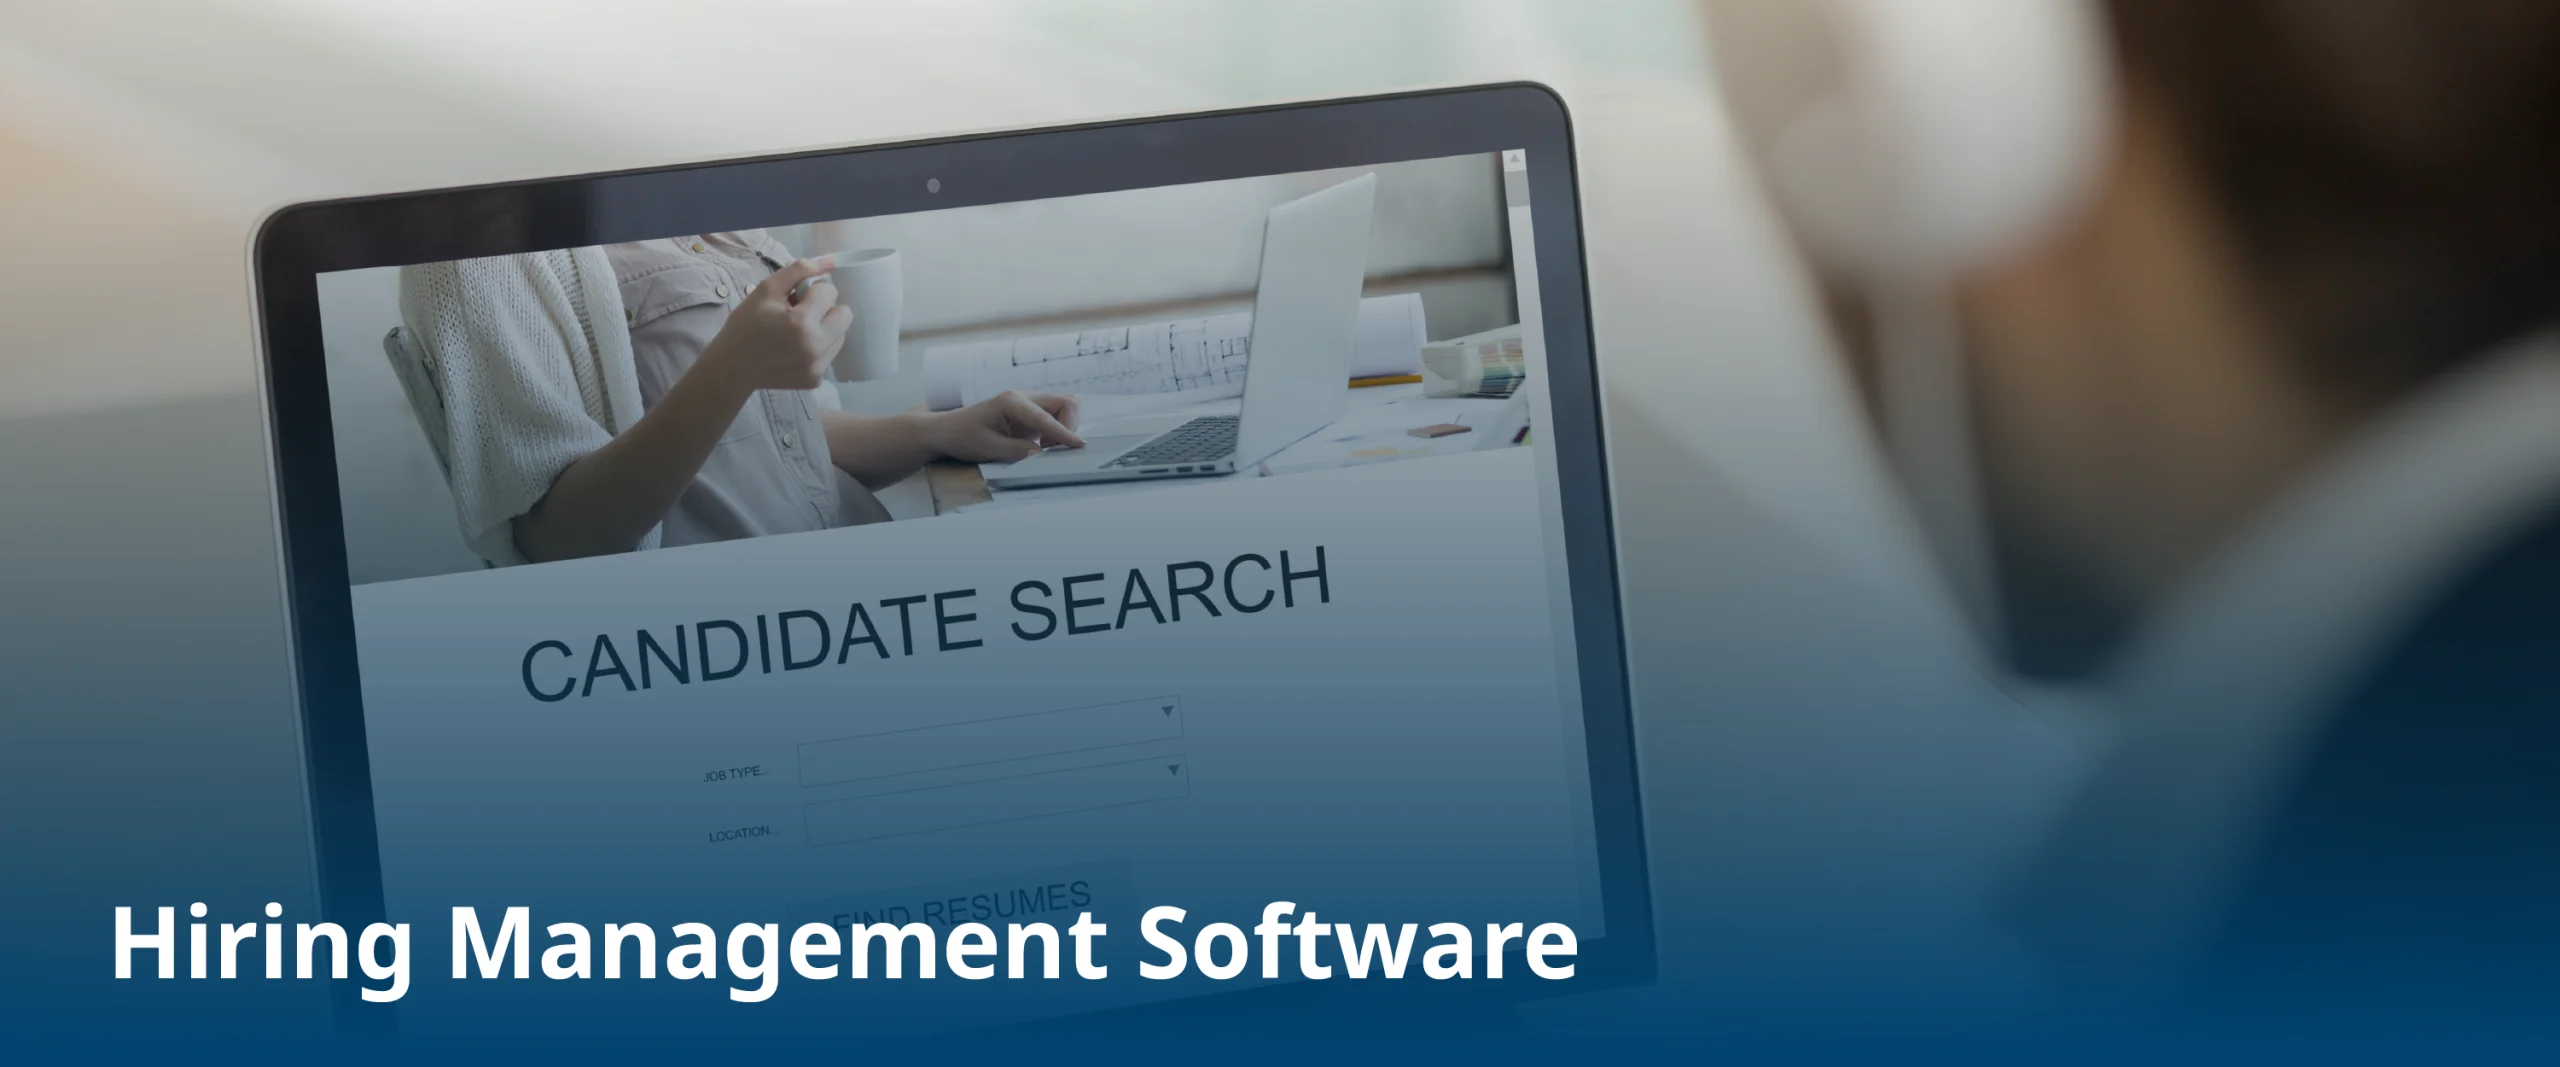 Improve Your Hiring Process With Effective Hiring Management Software